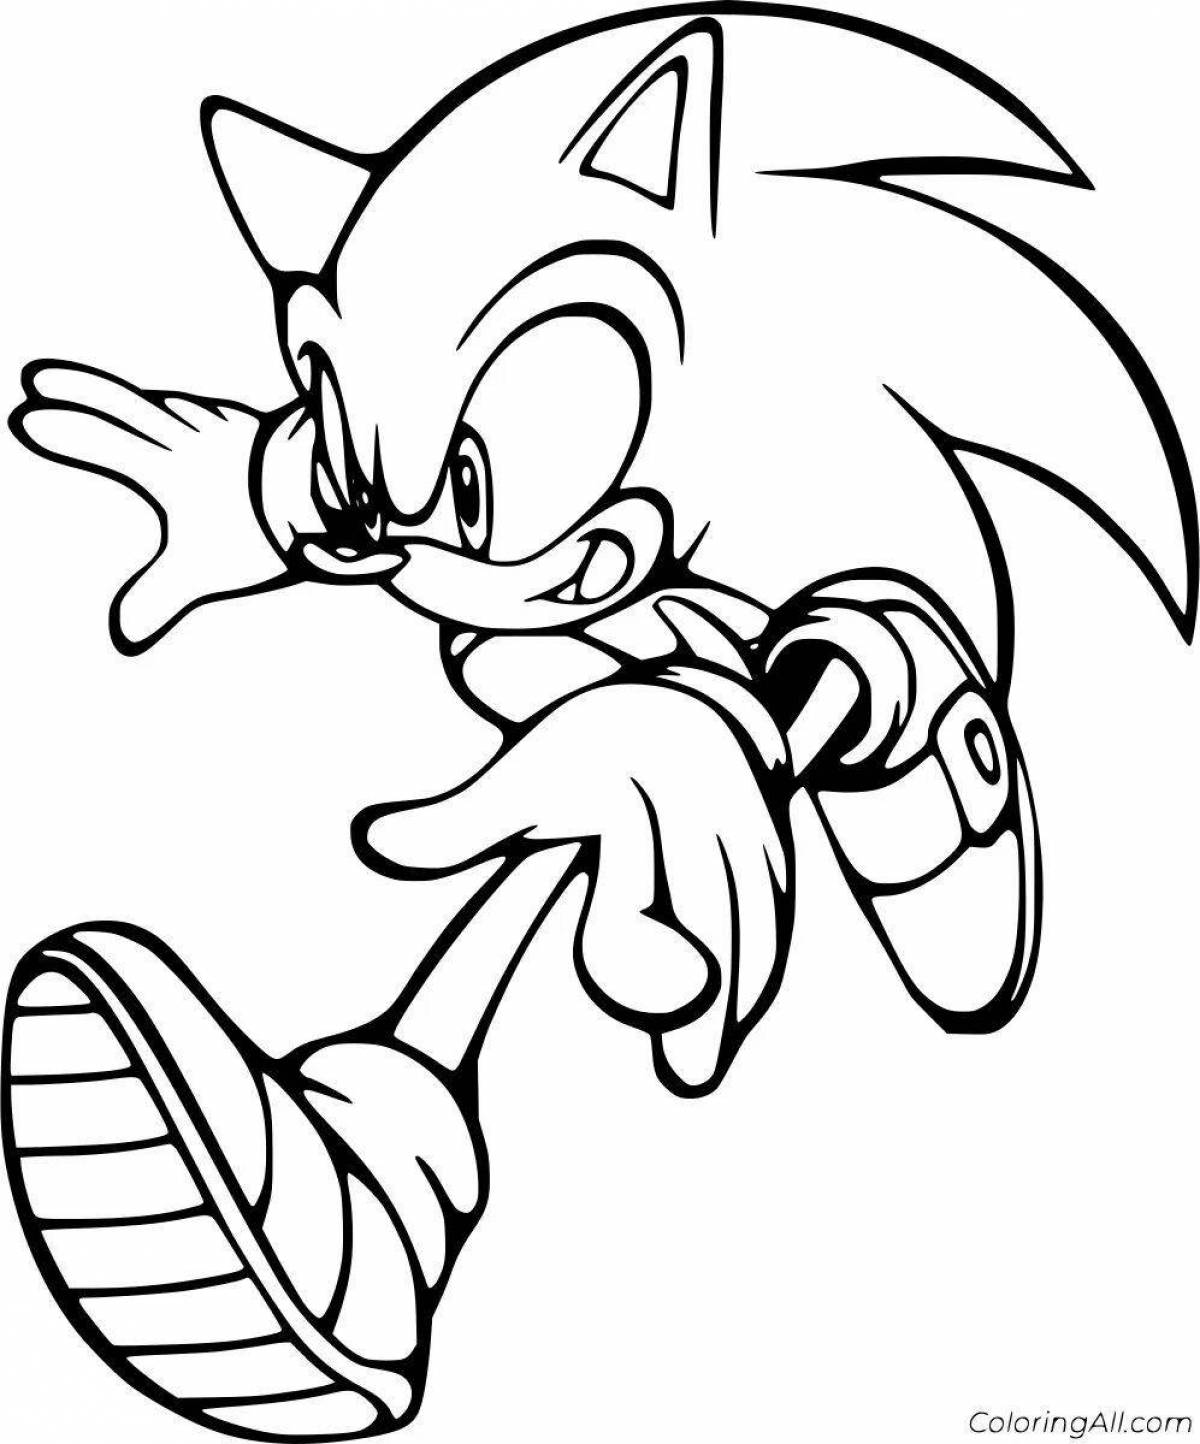 Coloring page adorable baby sonic